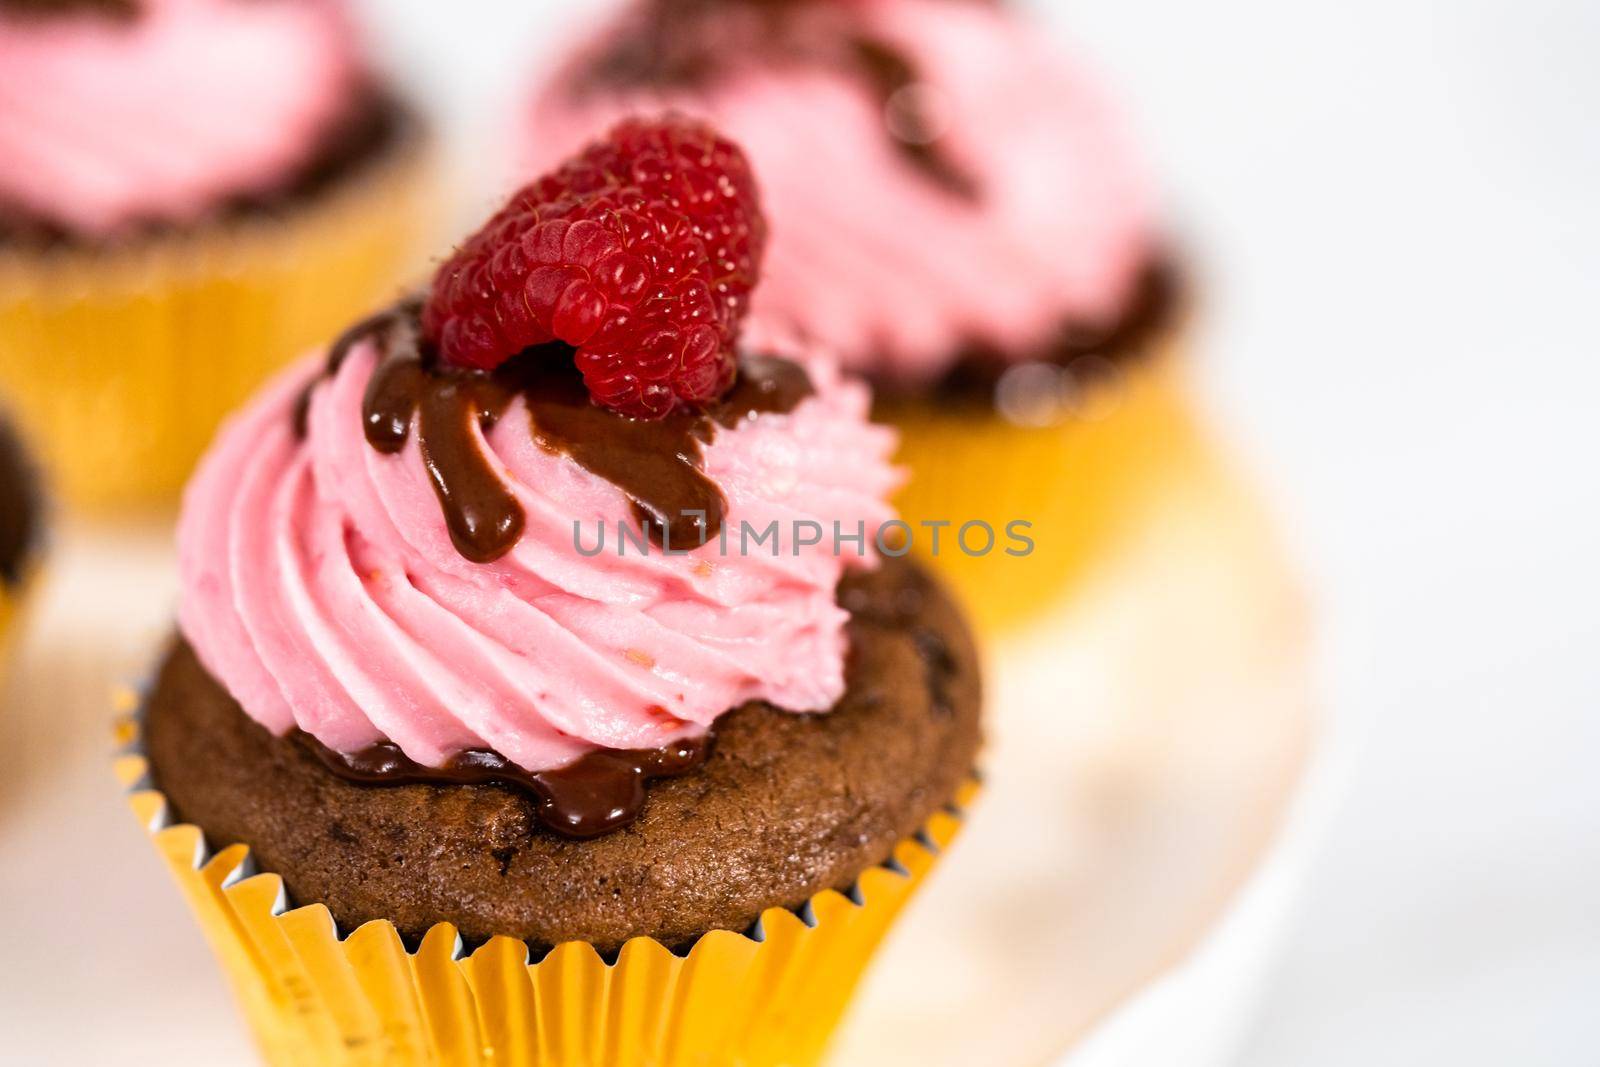 Gourmet chocolate raspberry cupcakes drizzled with chocolate ganache and topped with a fresh raspberry.